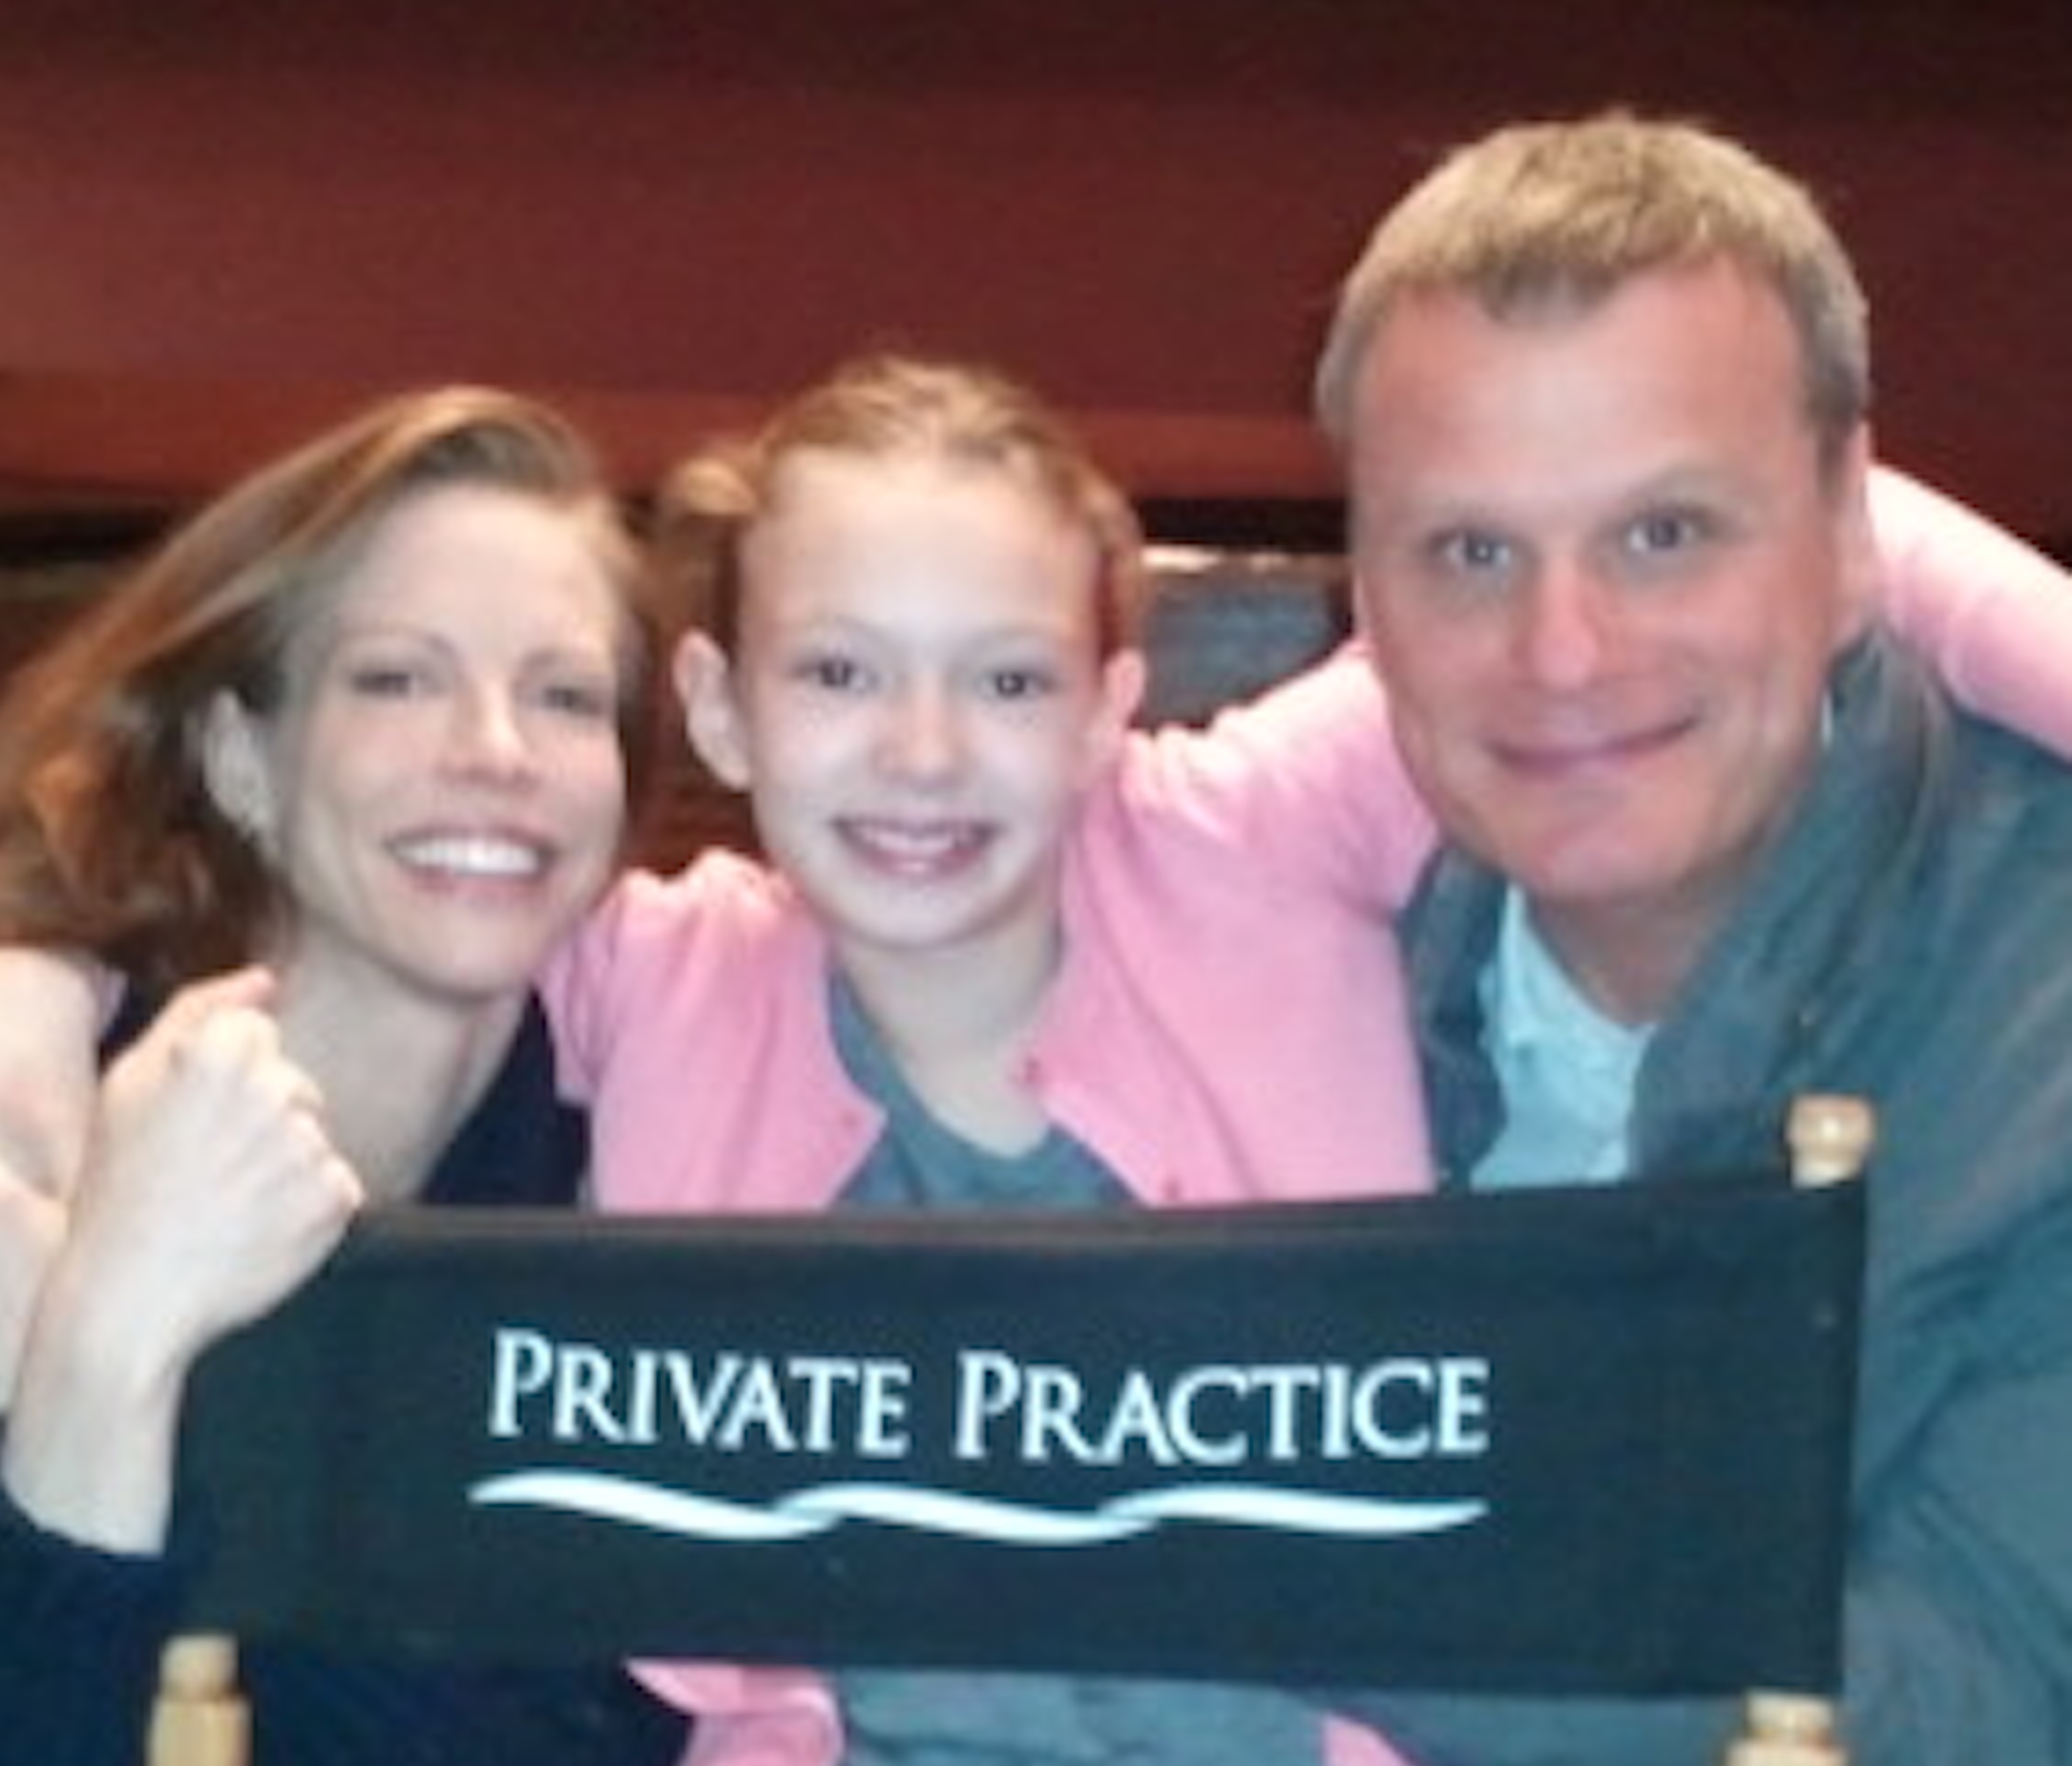 Private Practice - Ep # 520 Guest Cast: Leslie Stevens, Charlotte White and Chris McGarry (TV Family)